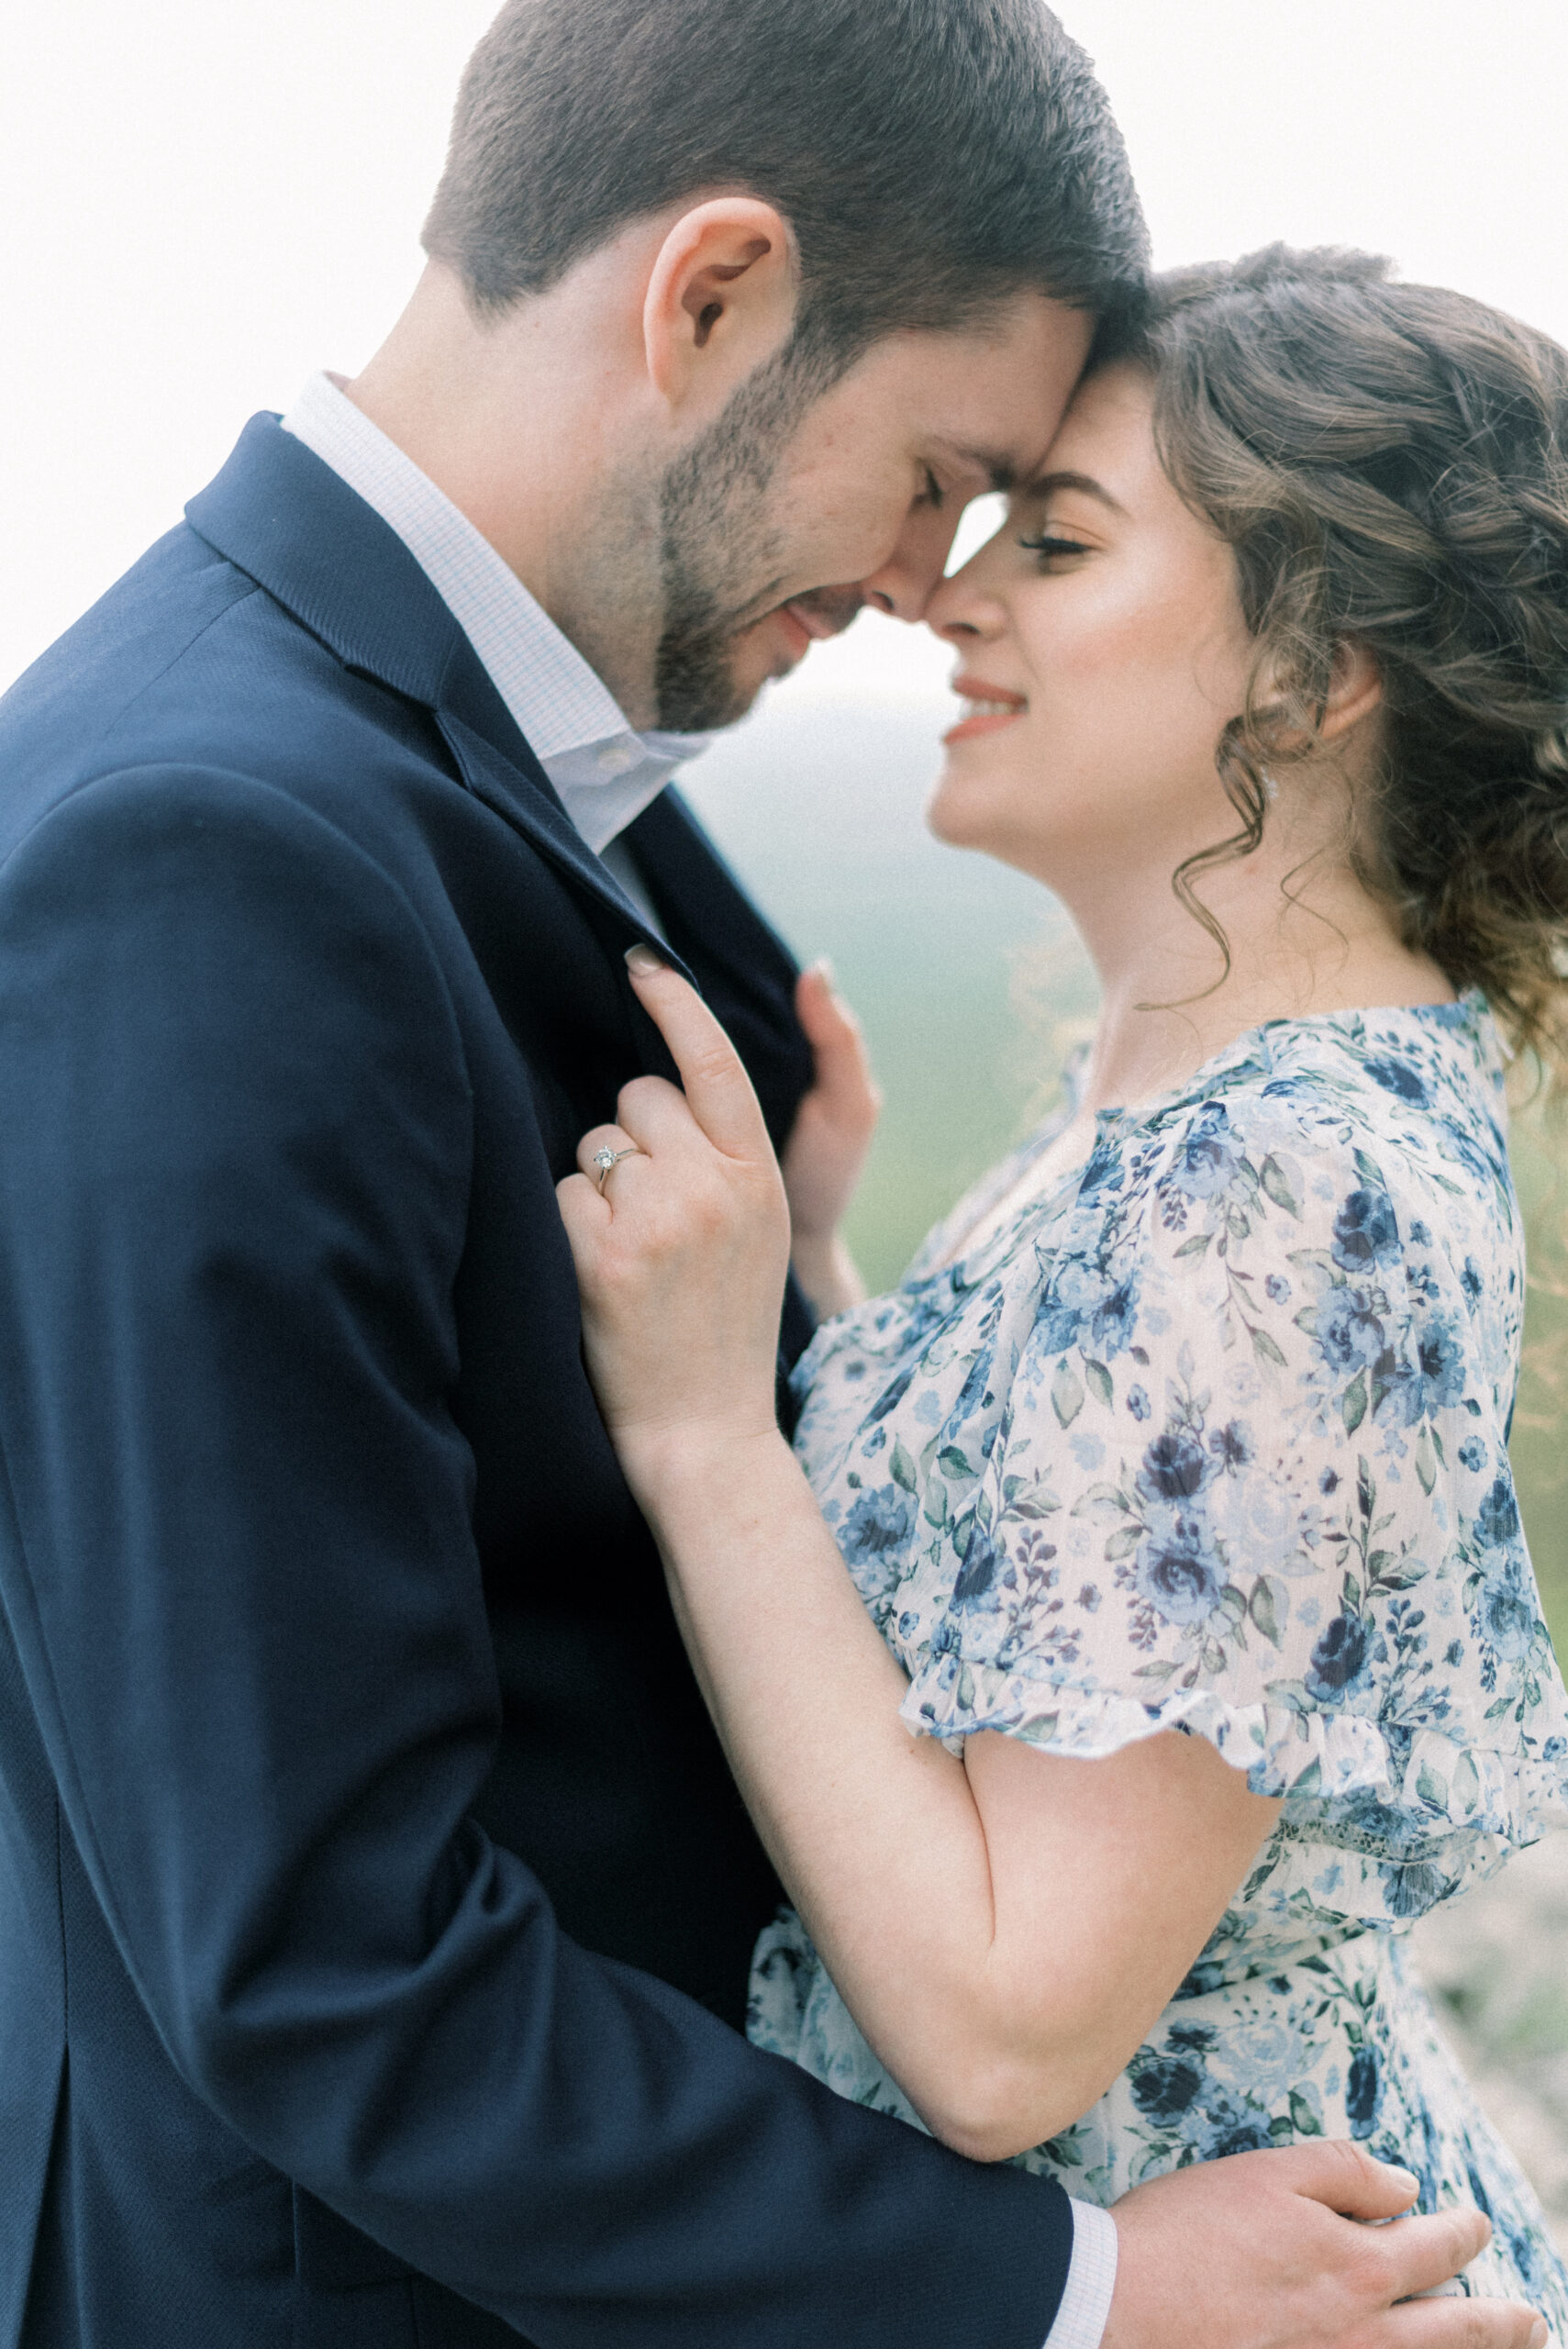 Maryland wedding photographer captures couple hugging with noses touching